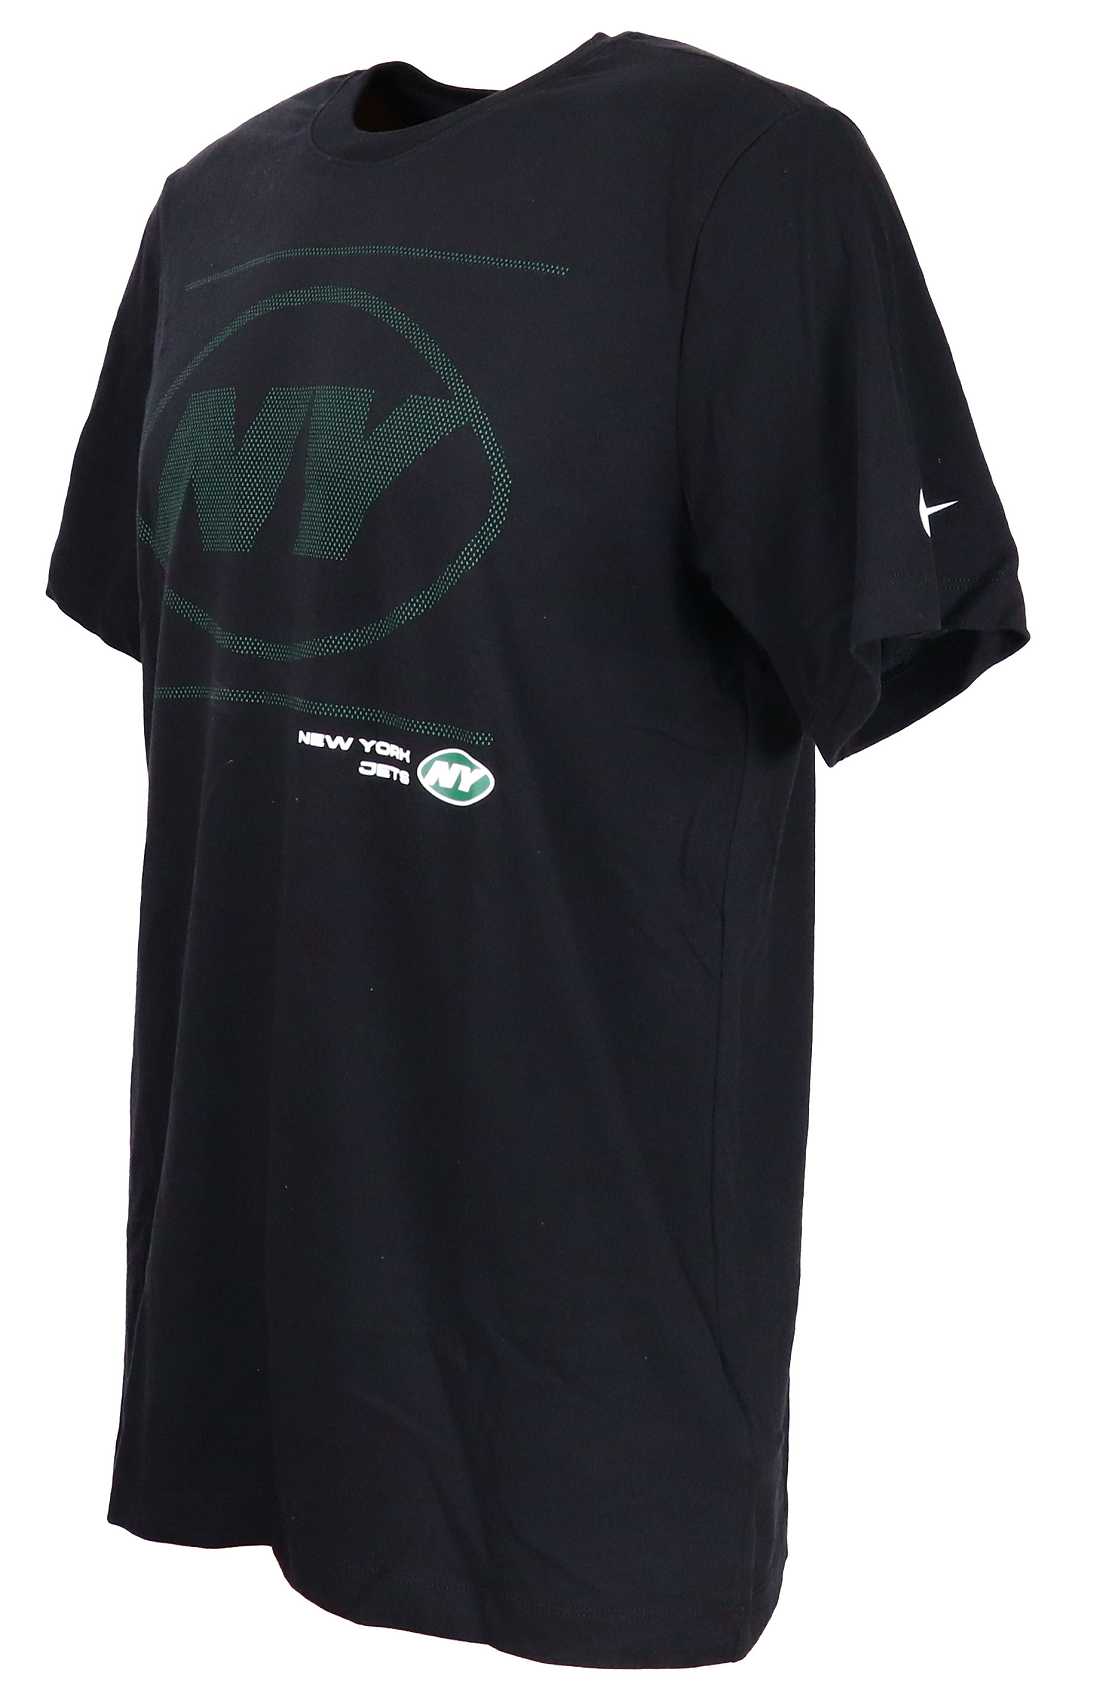 New York Jets NFL DFCT Team Issue Tee Black T-Shirt Nike